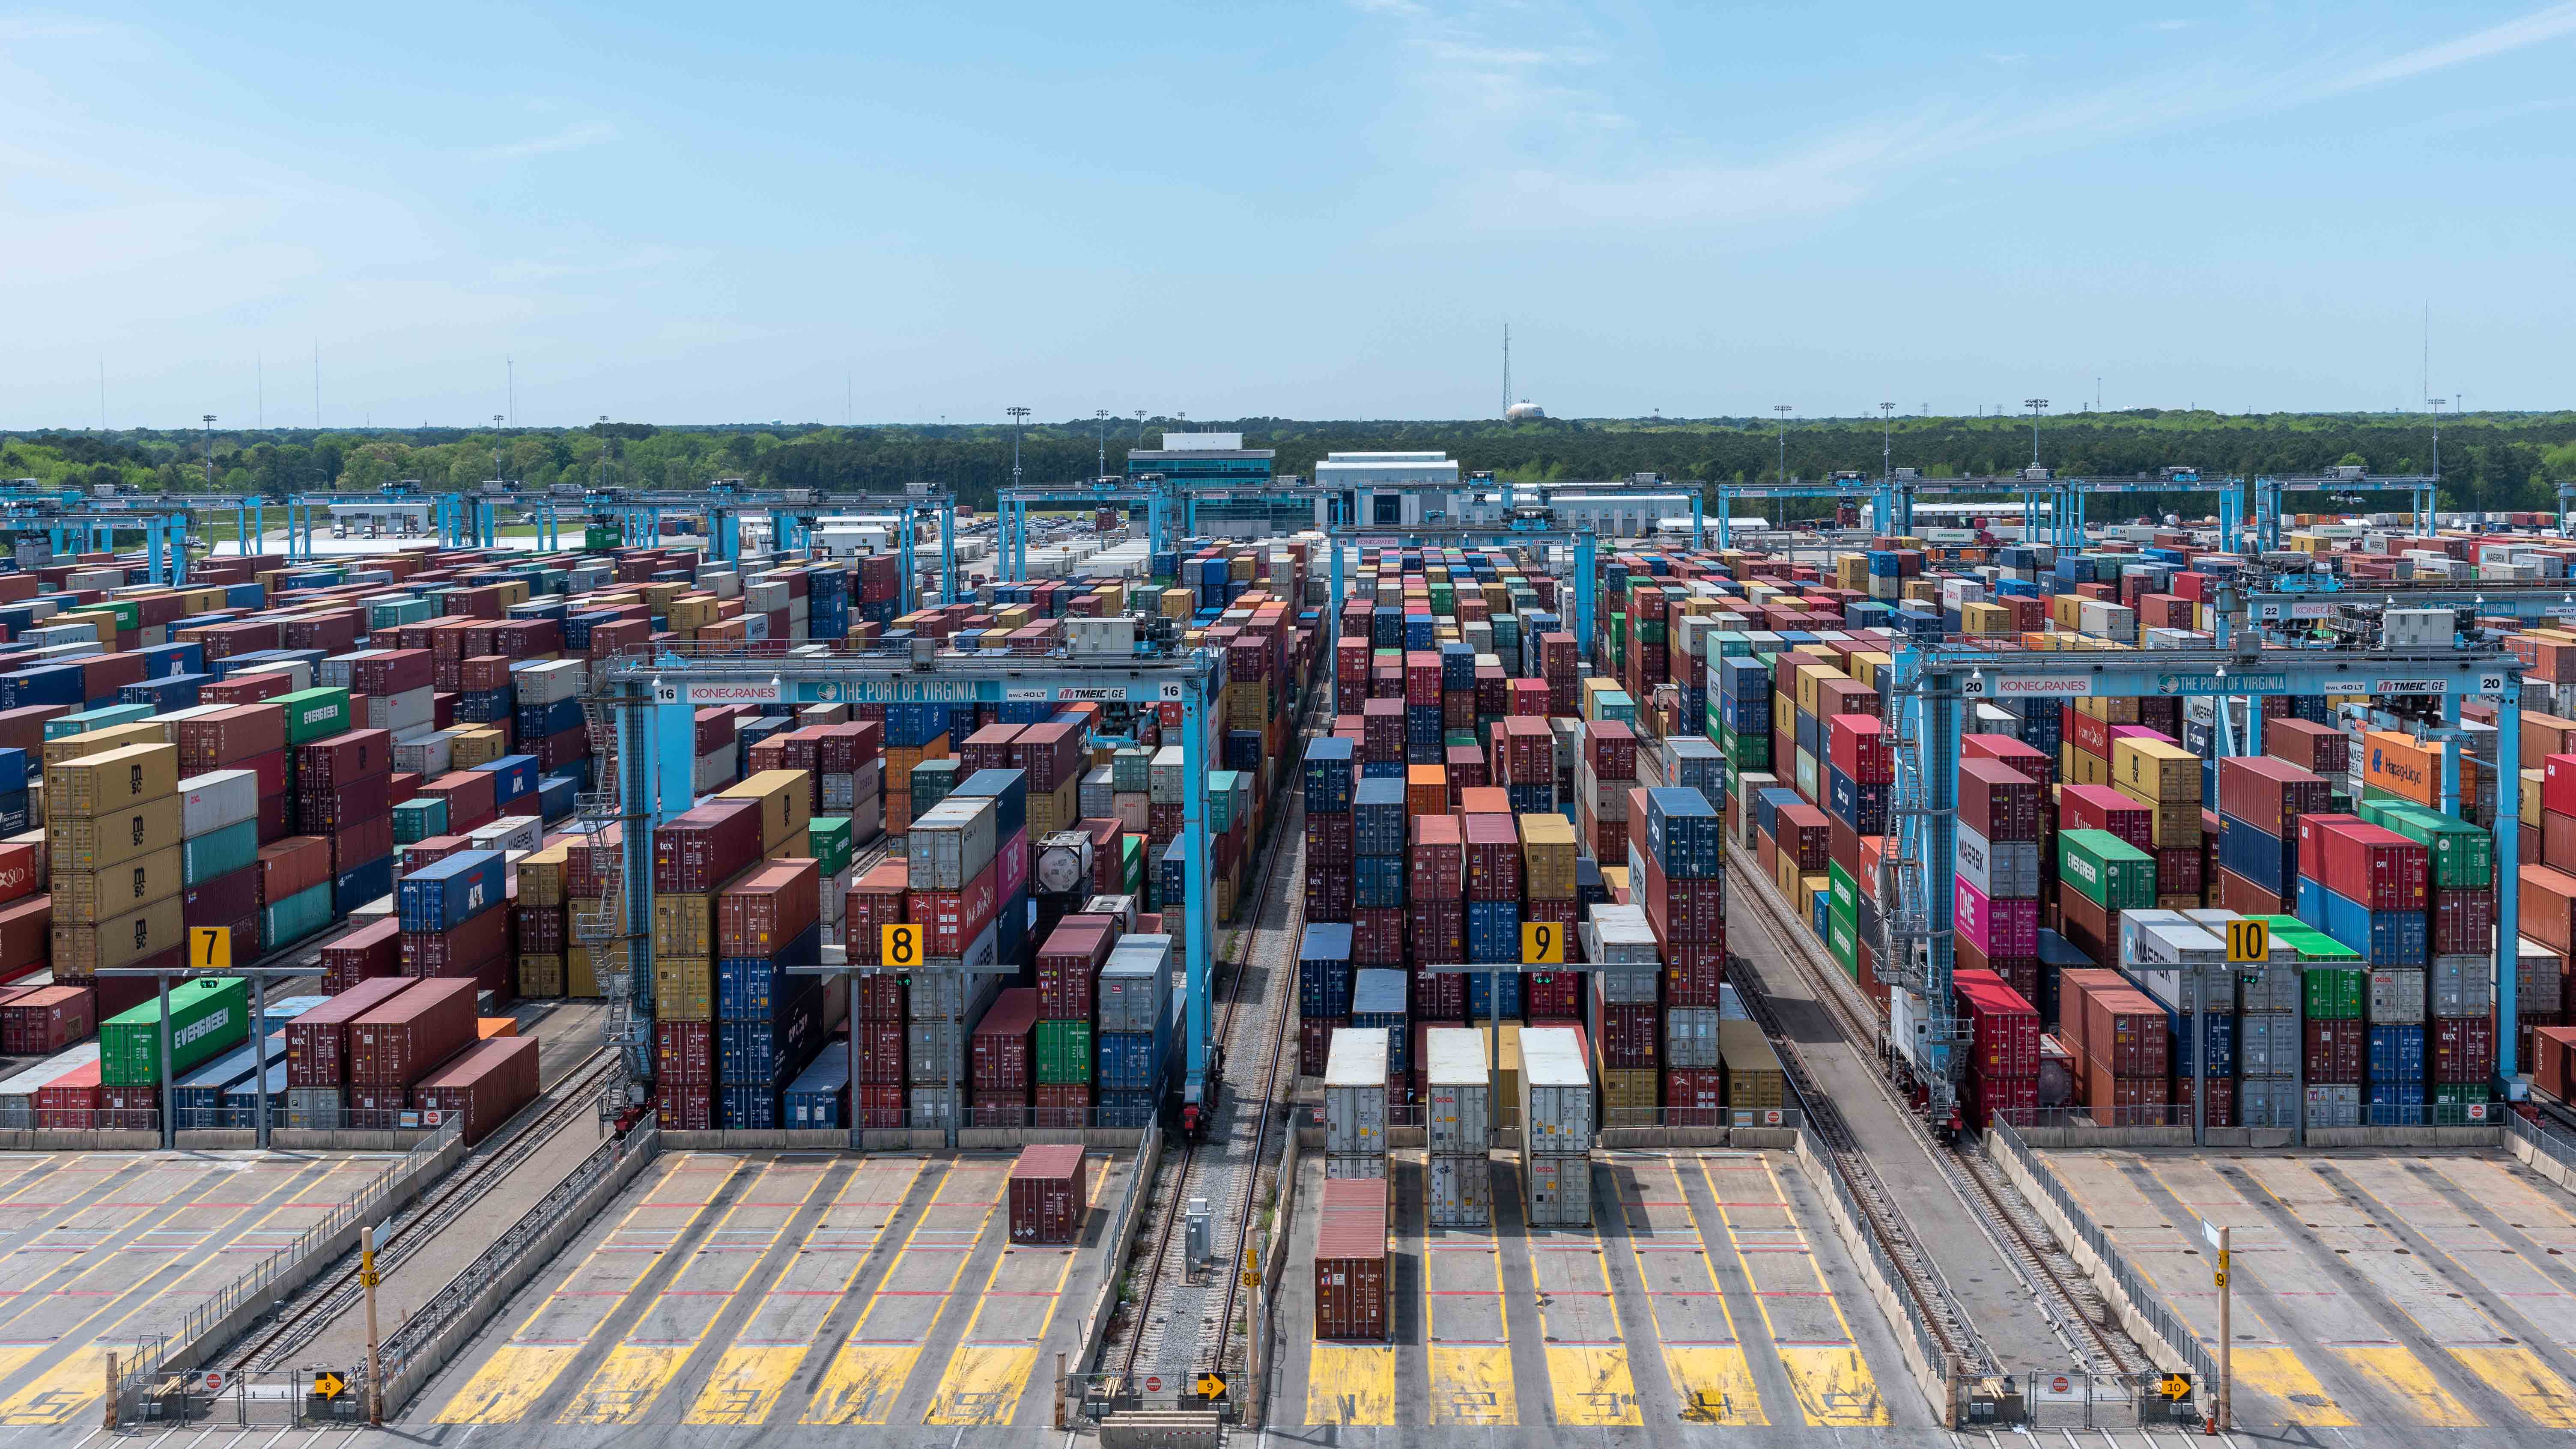 Photo by Mariusz Bugno via Shutterstock. The maritime industry in Hampton Roads continues to grow, prompting ODU's decision to launch a school dedicated to it.